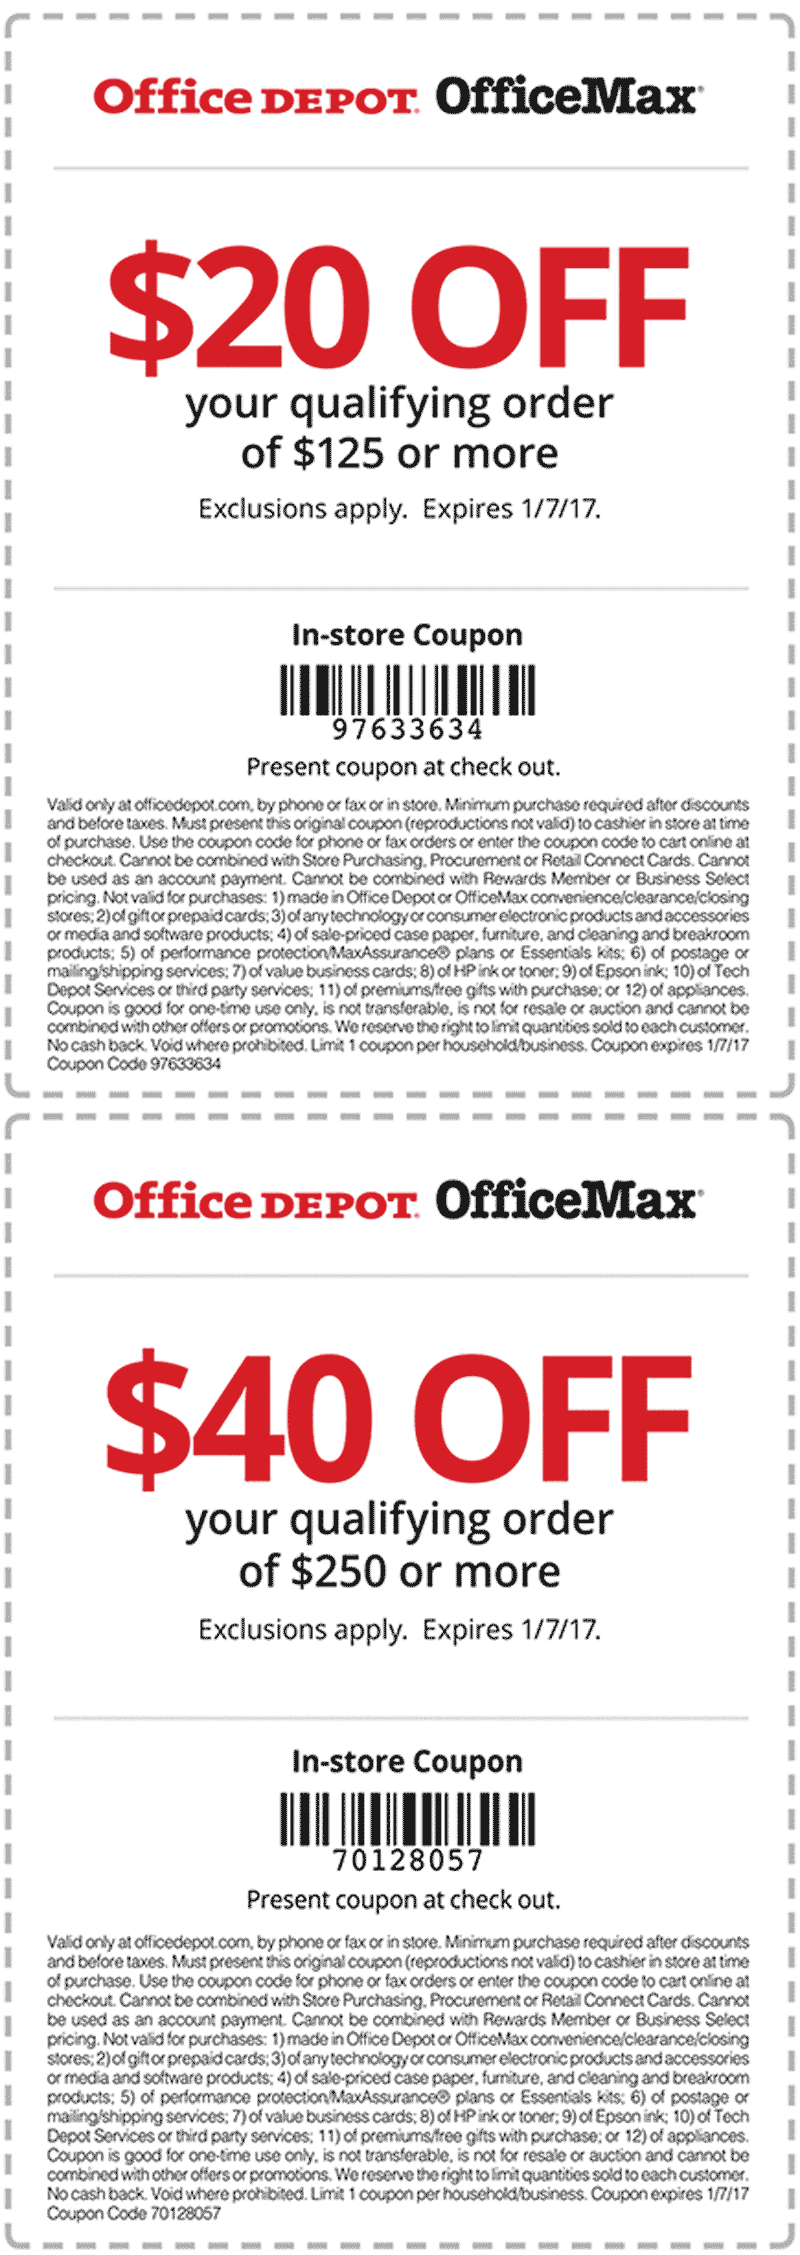 office-depot-coupons-20-off-125-more-at-office-depot-officemax